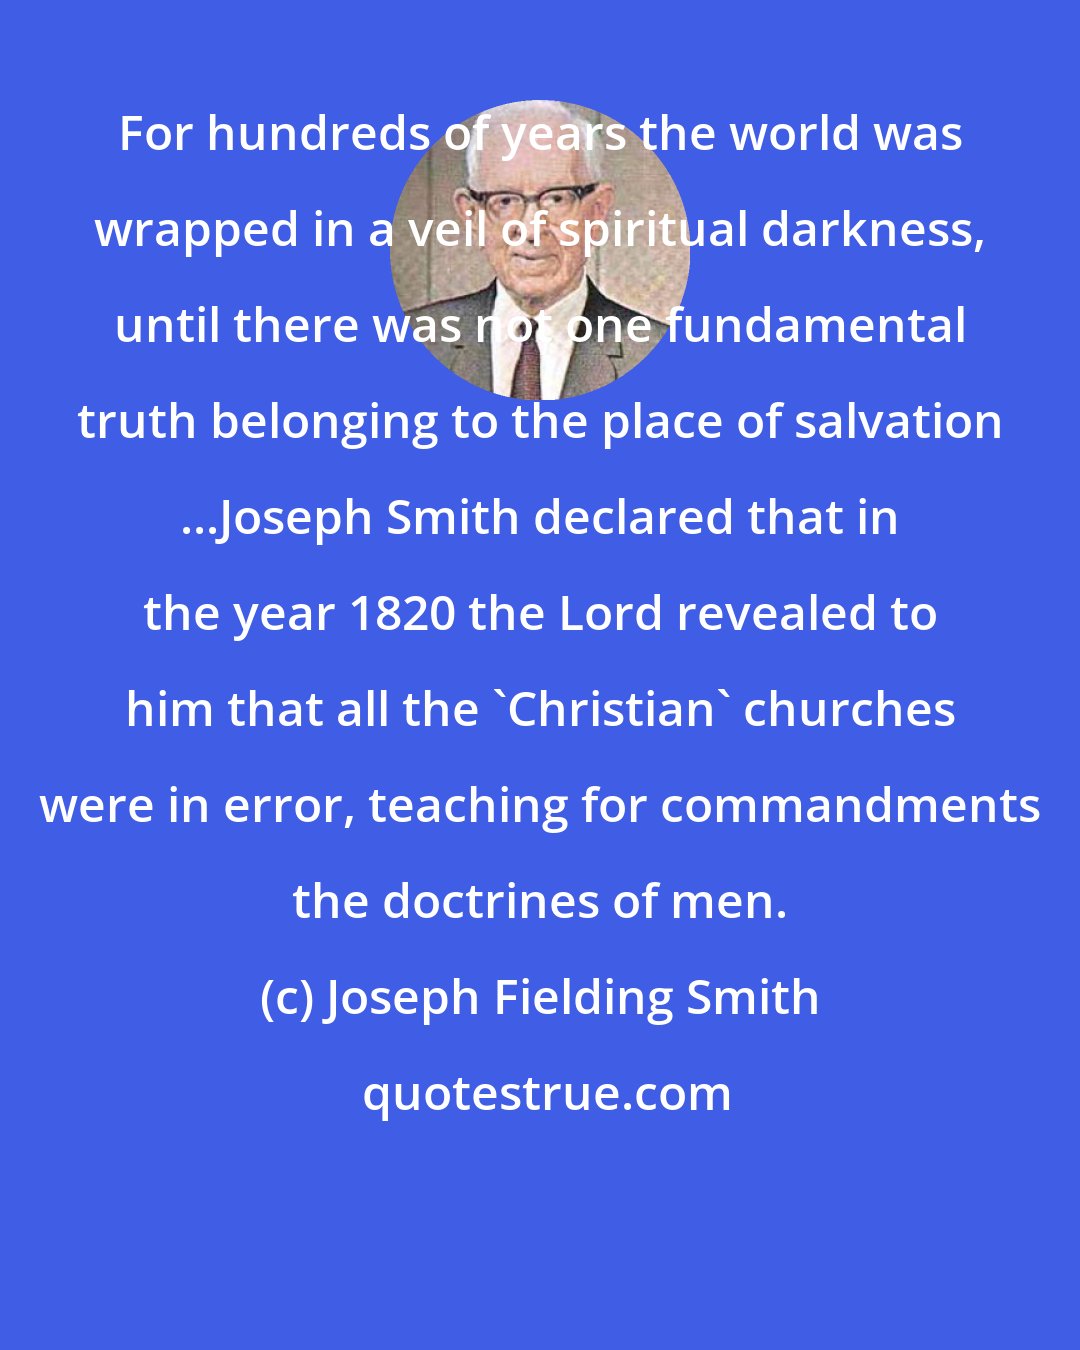 Joseph Fielding Smith: For hundreds of years the world was wrapped in a veil of spiritual darkness, until there was not one fundamental truth belonging to the place of salvation ...Joseph Smith declared that in the year 1820 the Lord revealed to him that all the 'Christian' churches were in error, teaching for commandments the doctrines of men.